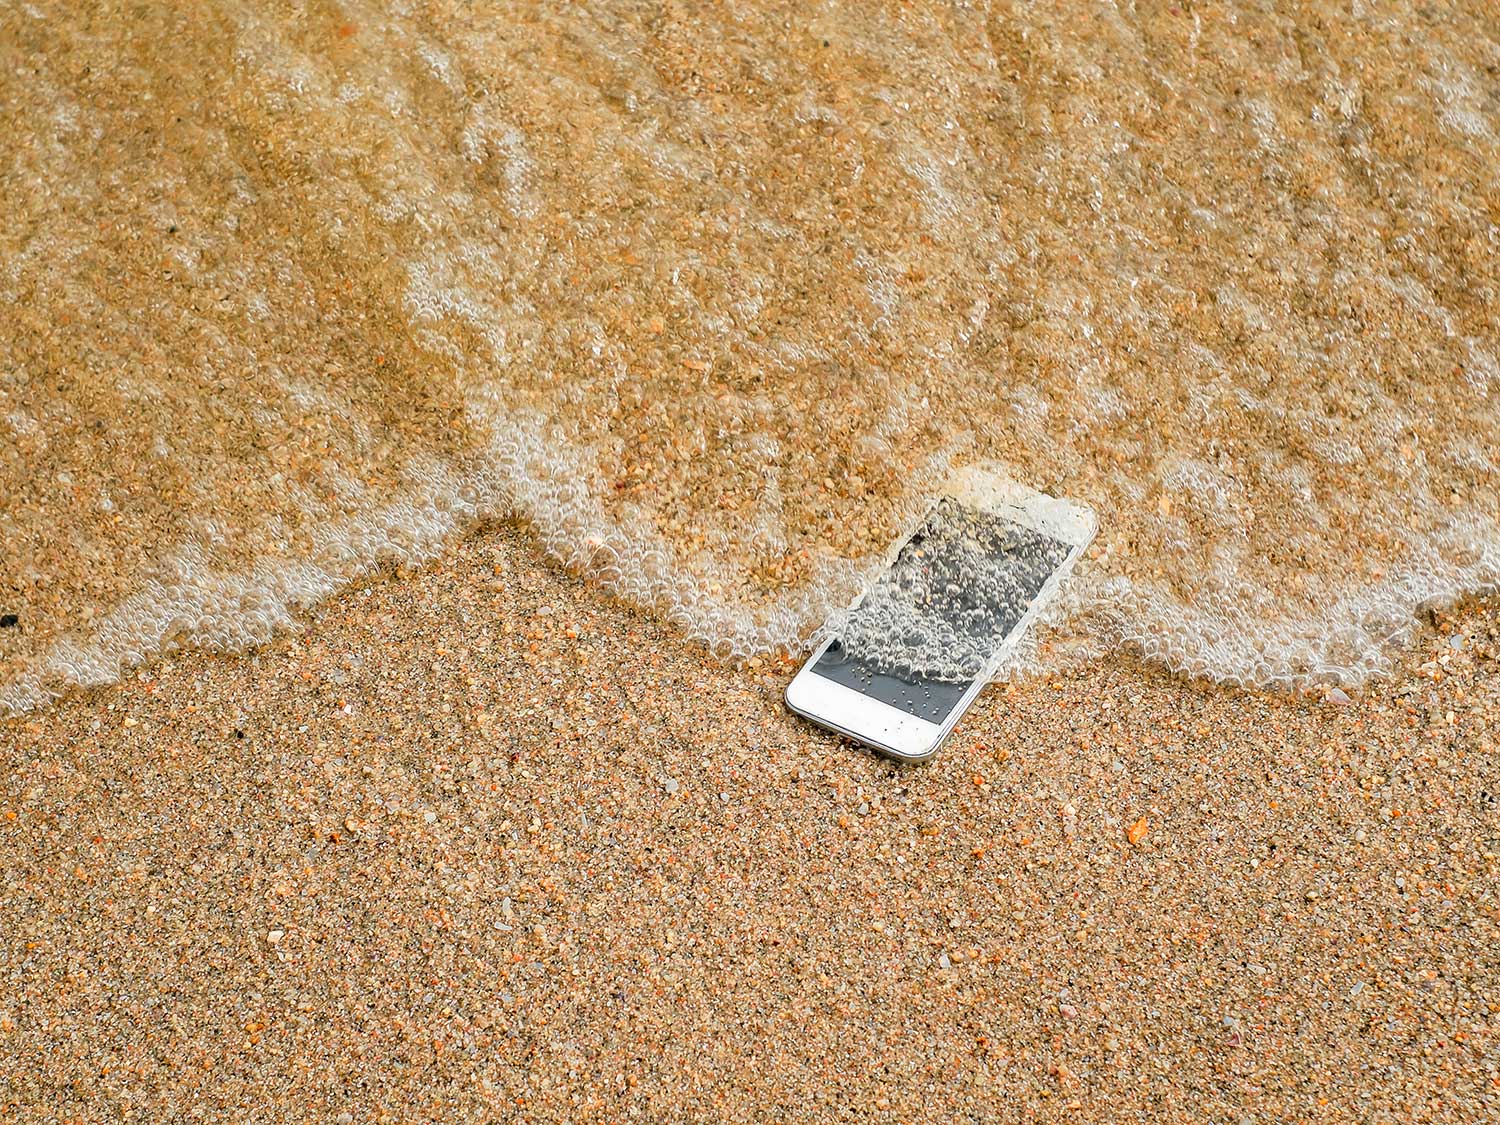 phone in the water